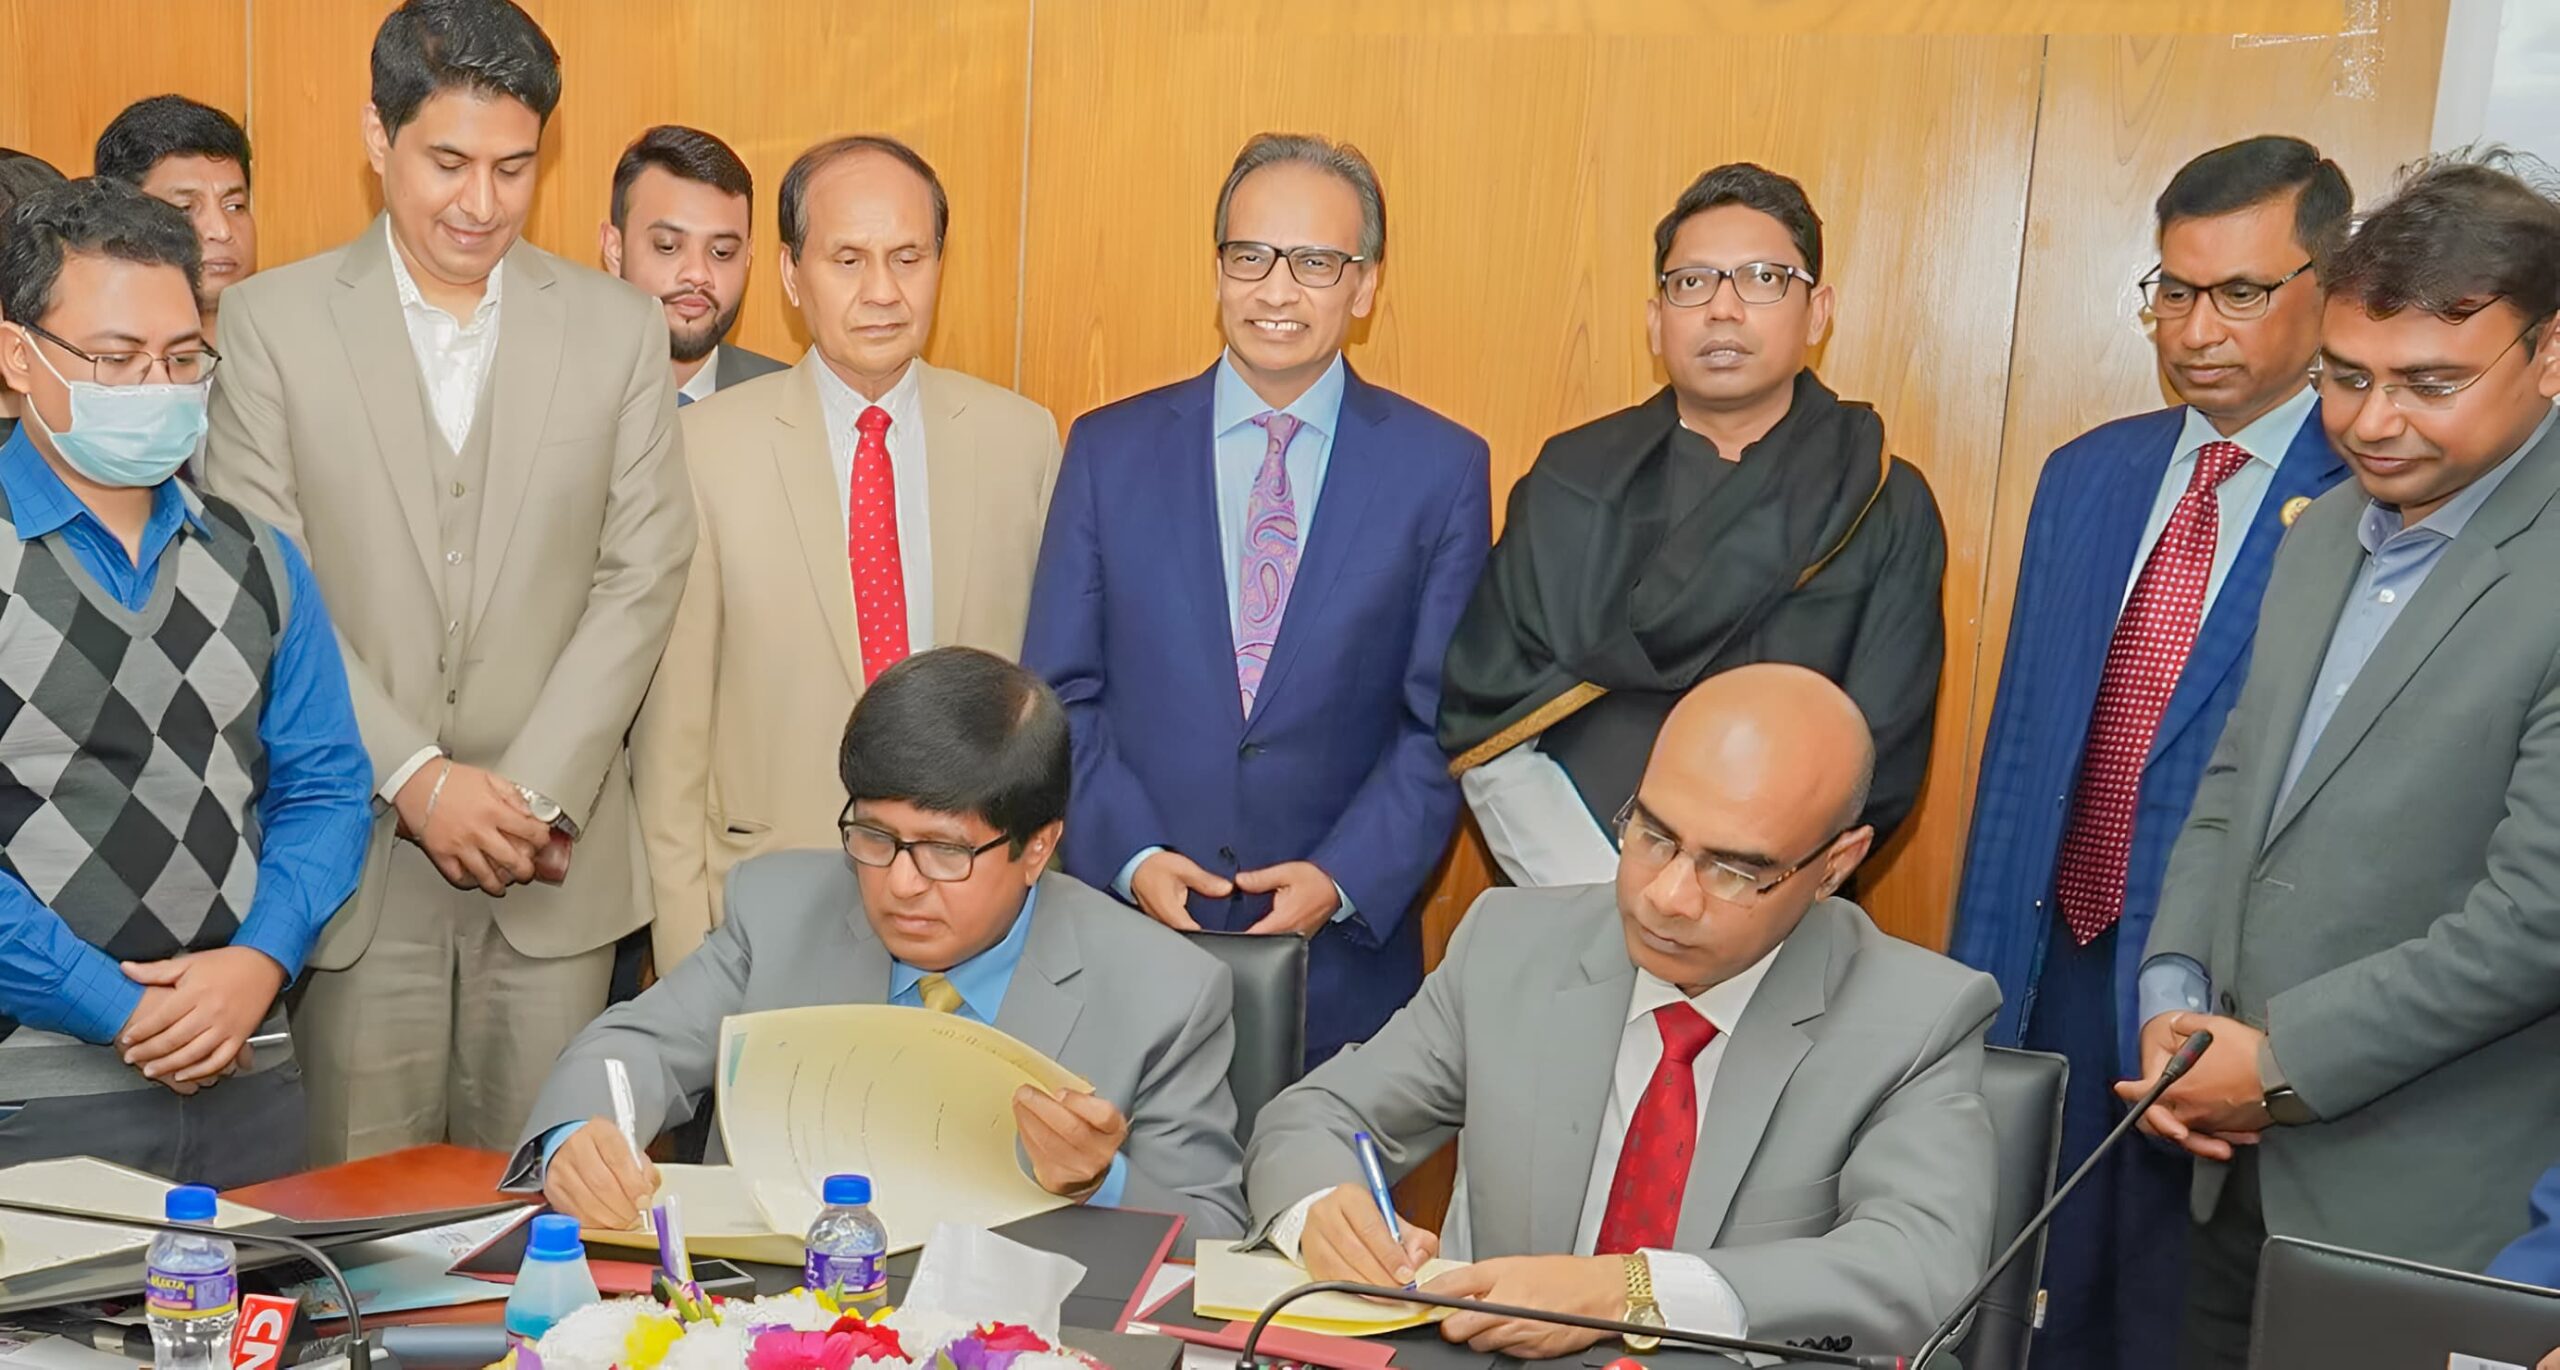 CodersTrust Signs MoU with Hi-Tech Park and DoICT for ICT Training Initiatives